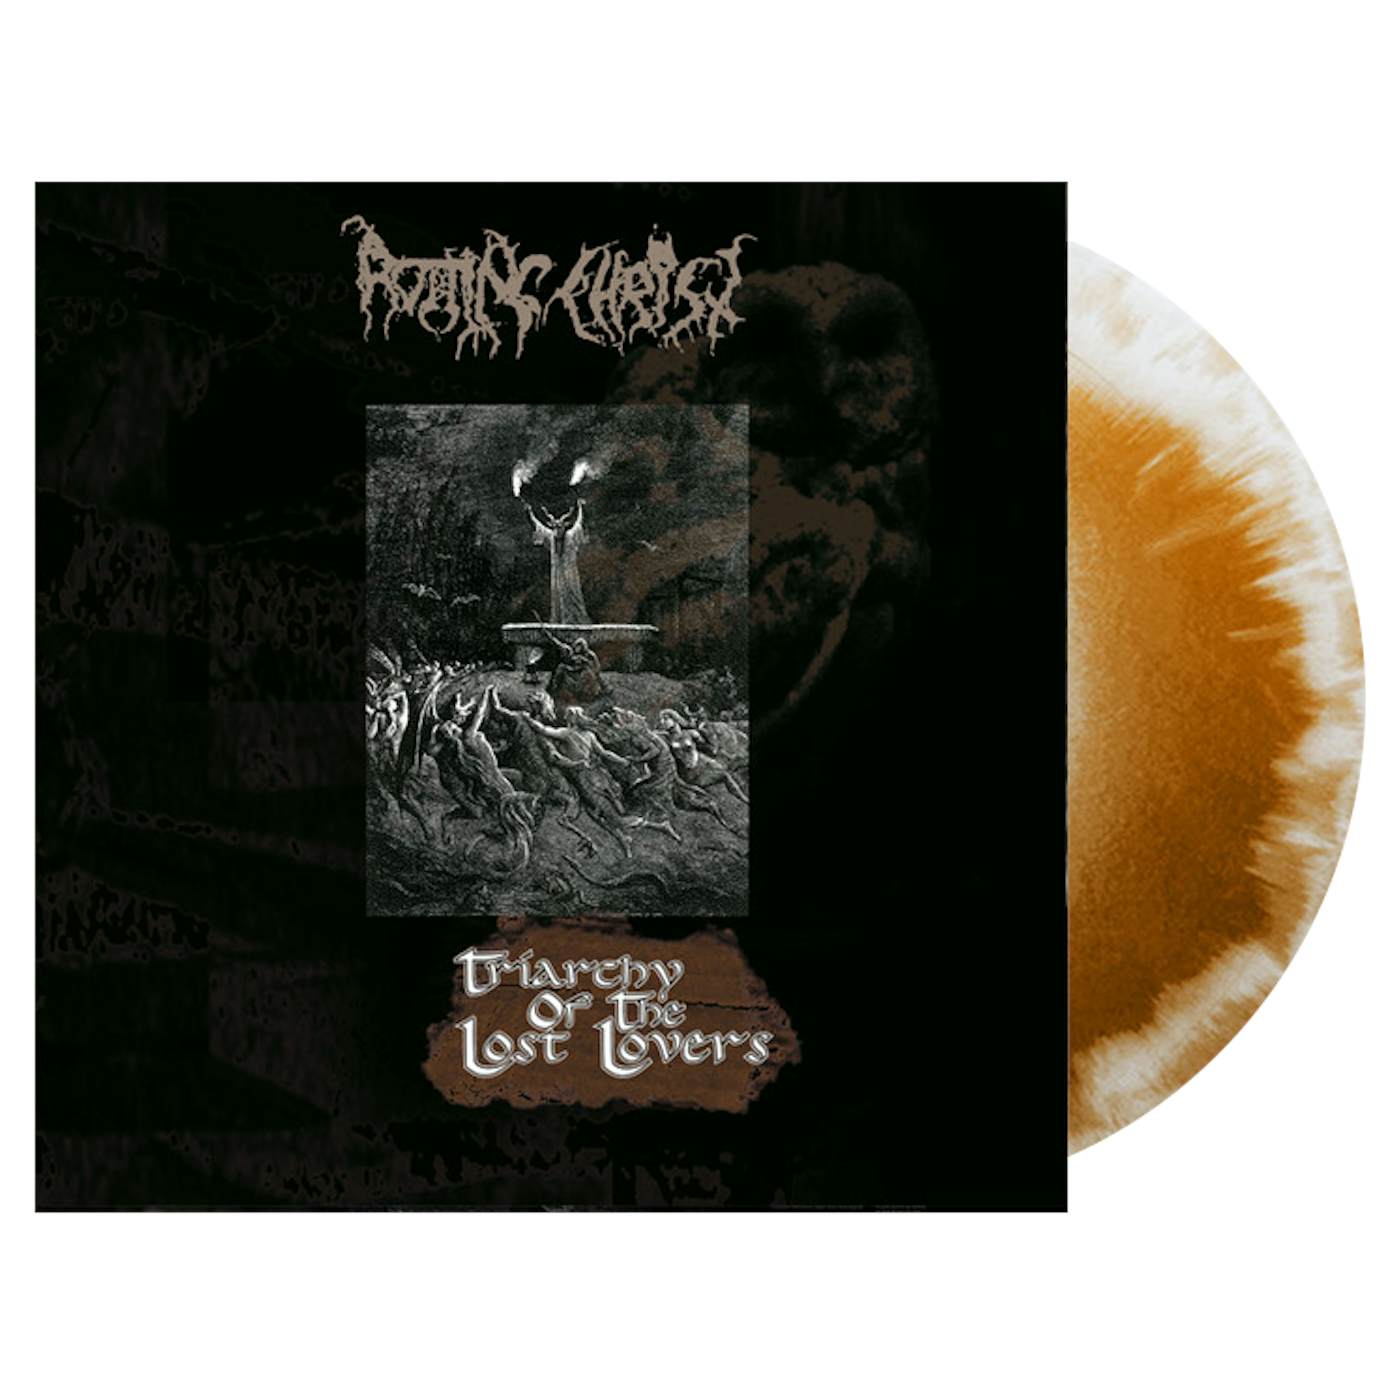 ROTTING CHRIST - 'Triarchy Of The Lost Lovers' LP (Vinyl)